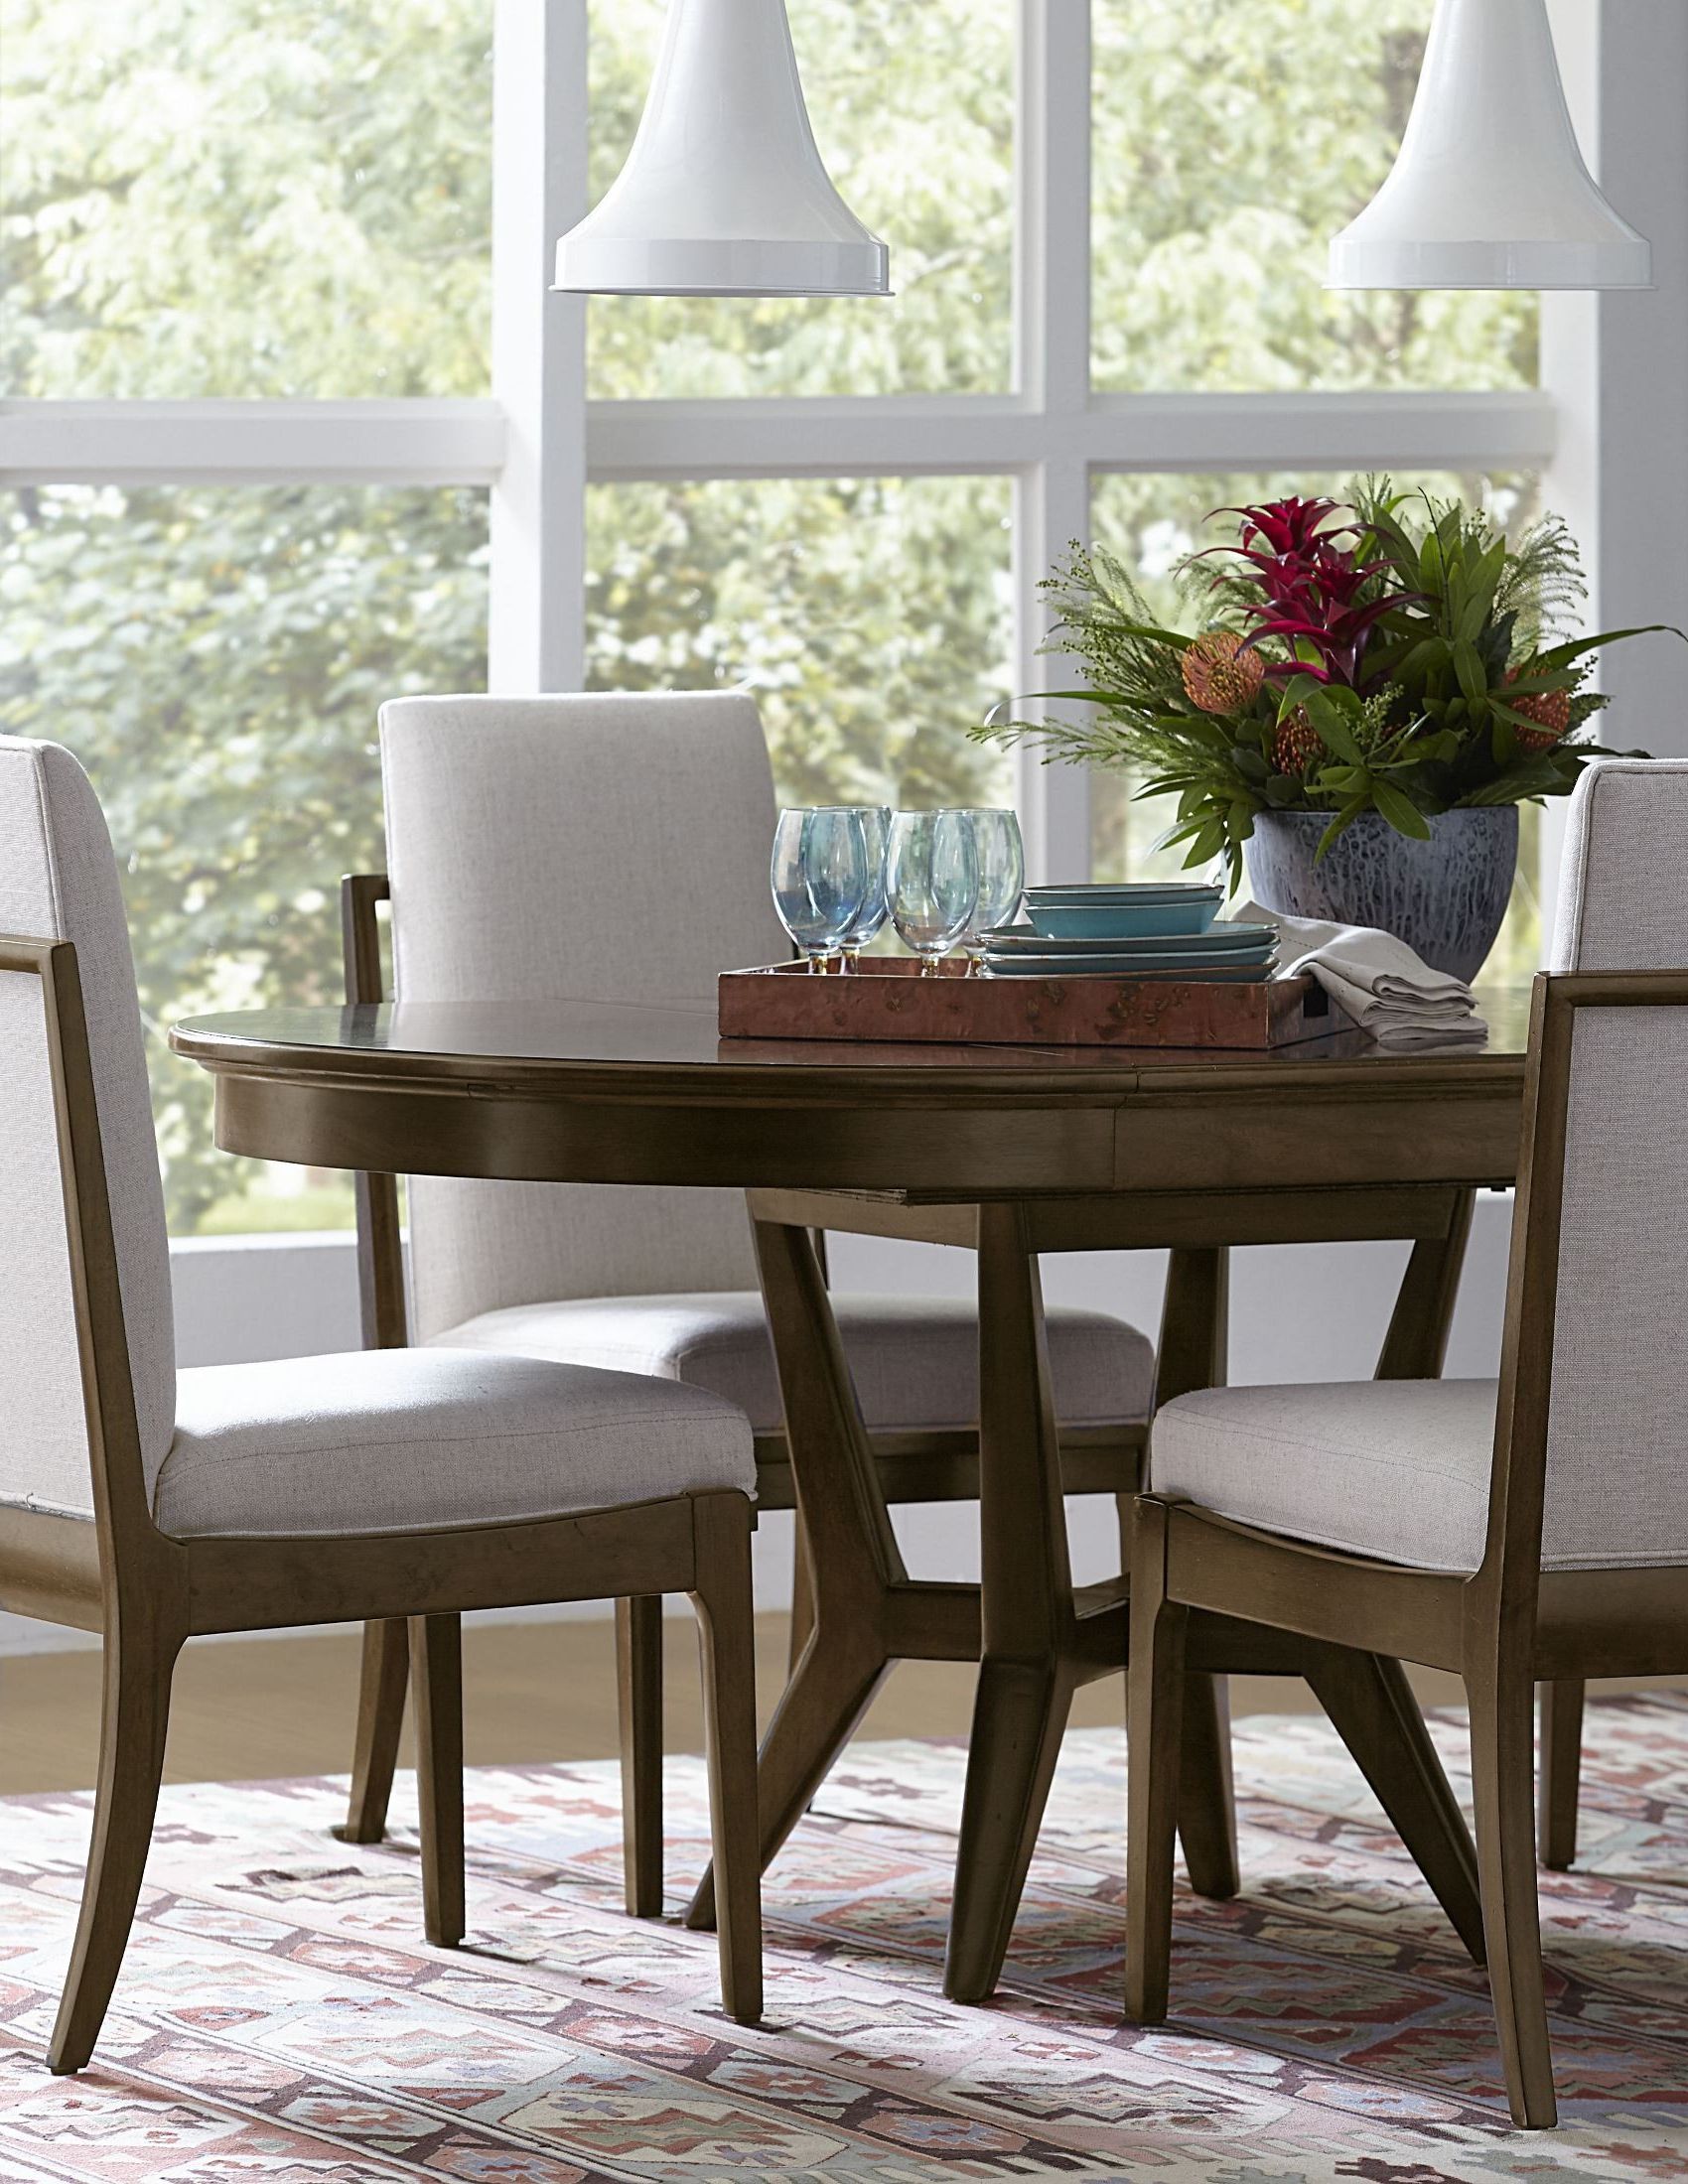 Walnut And White Dining Tables With Regard To Most Recently Released Santa Clara Burnished Walnut Extendable Round Dining Table (View 6 of 20)